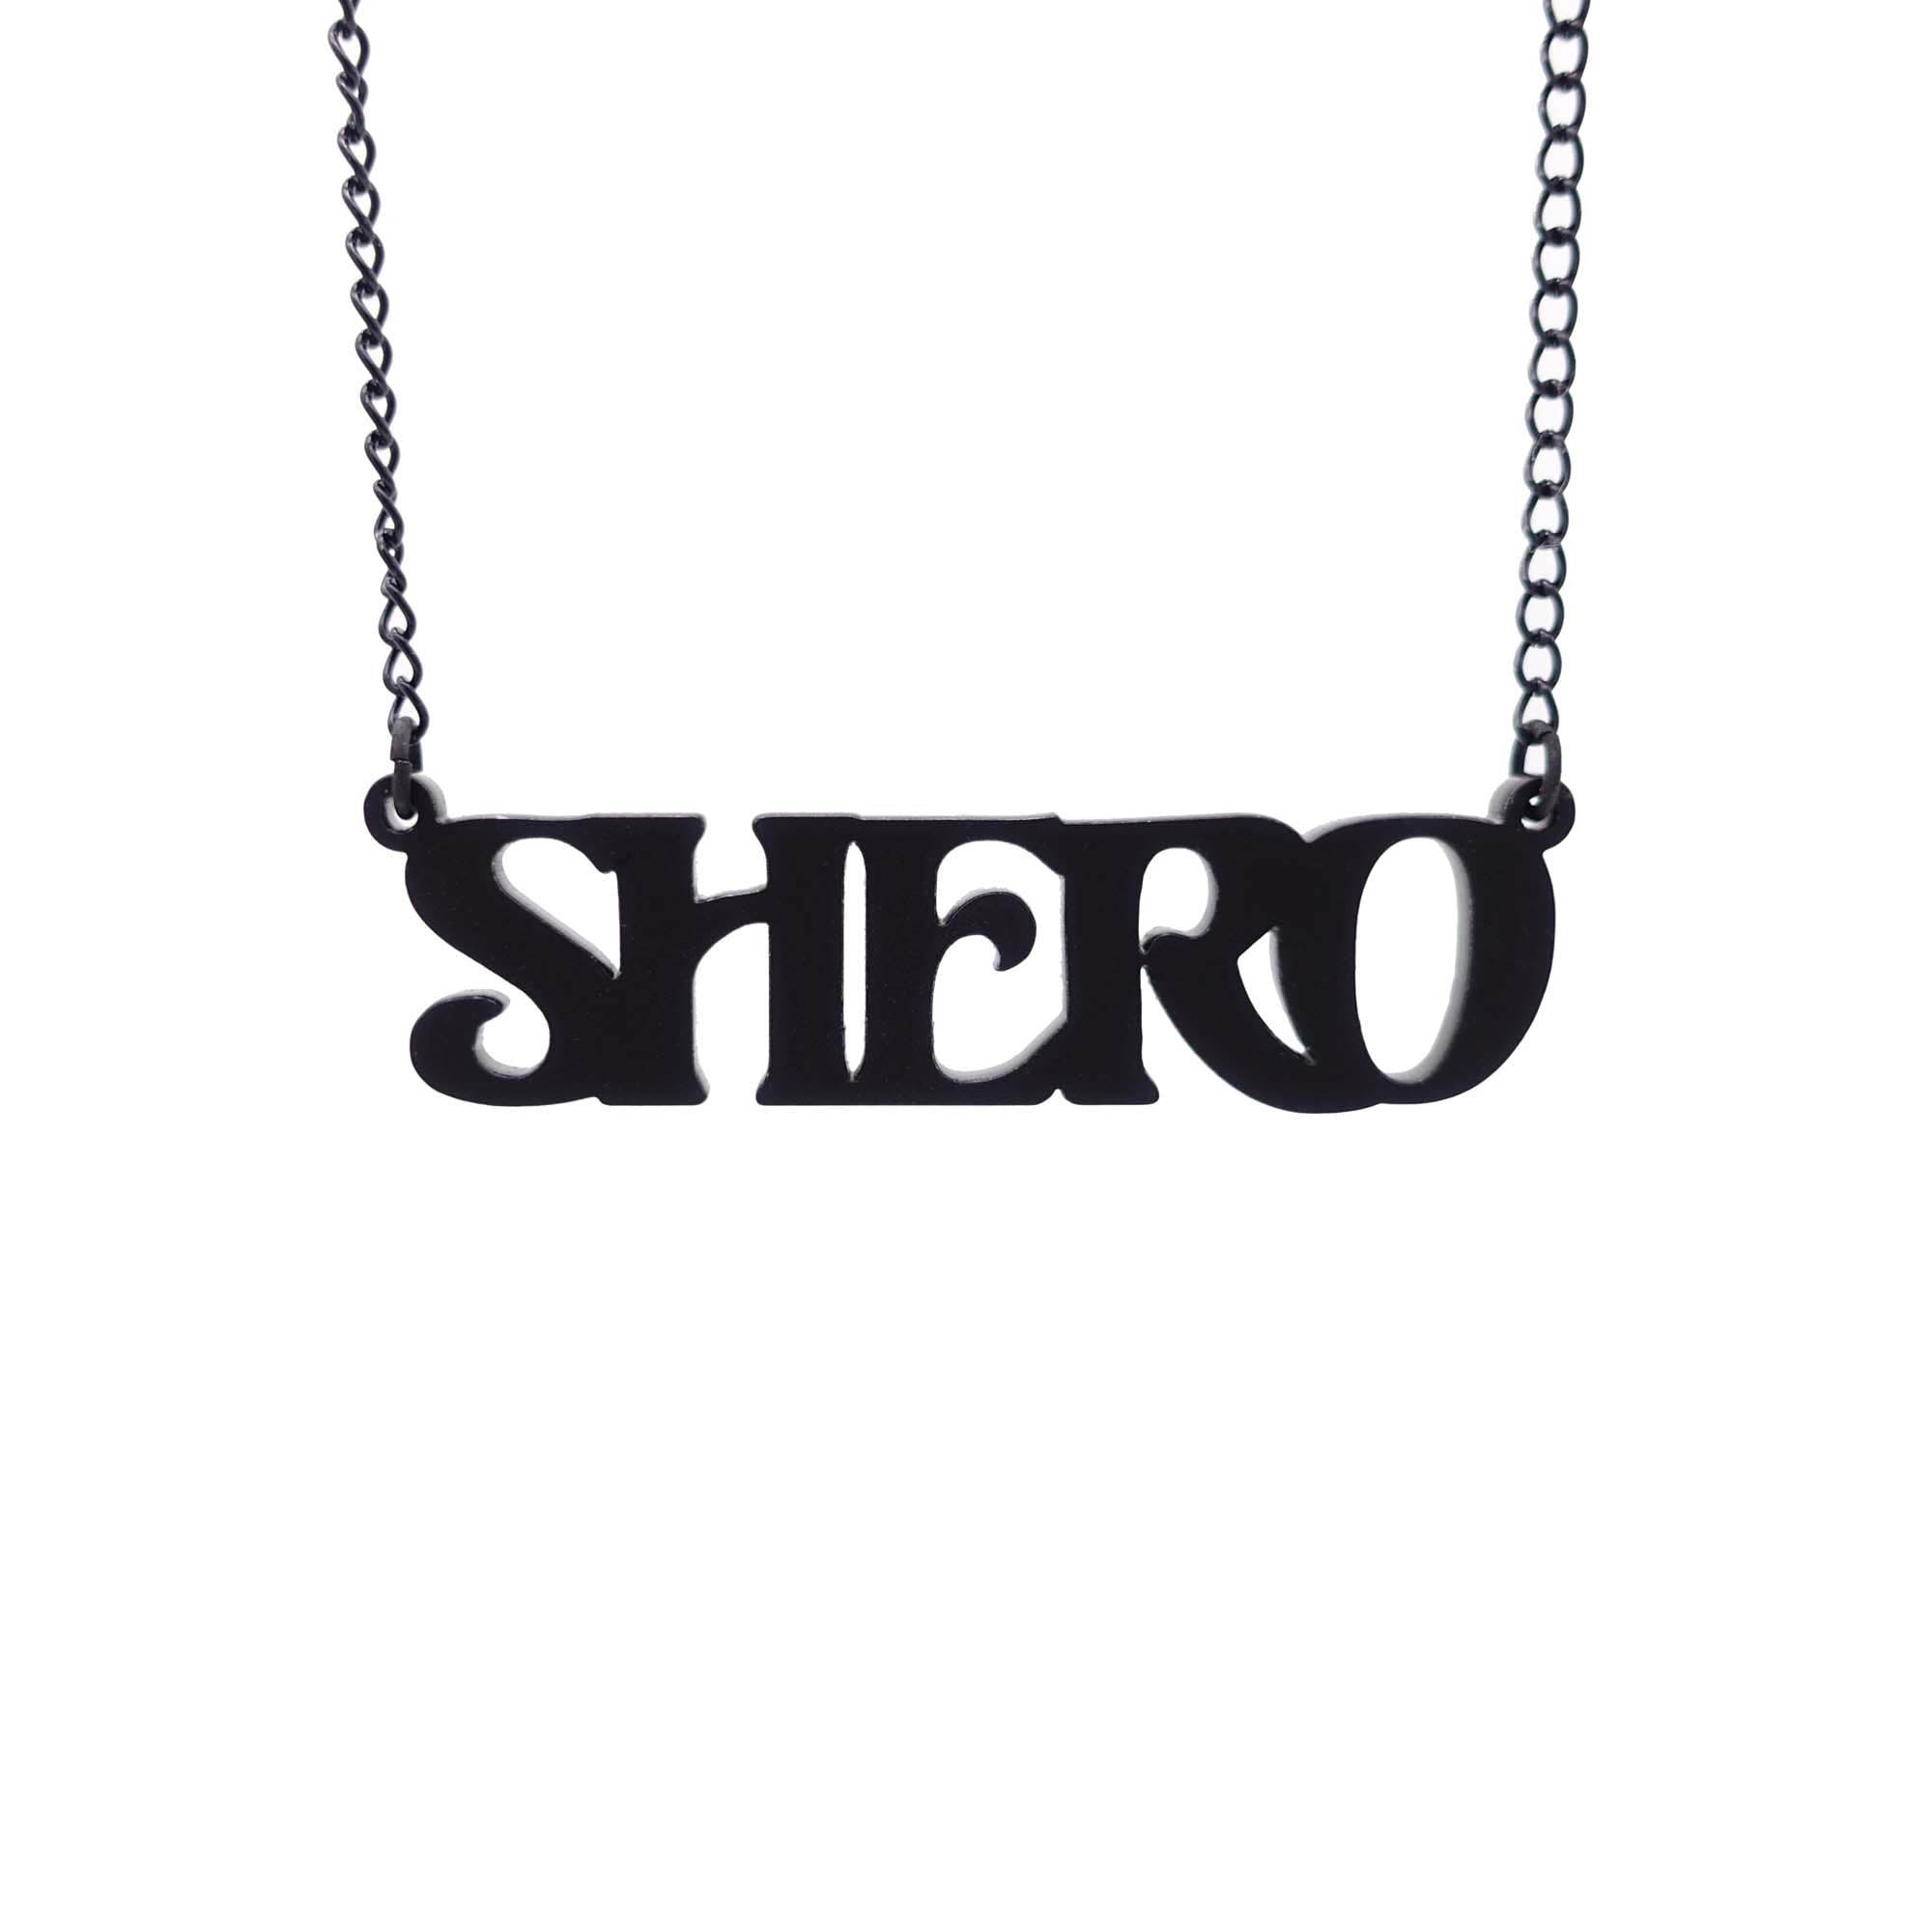 Matte black Shero necklace hanging against a white background. 